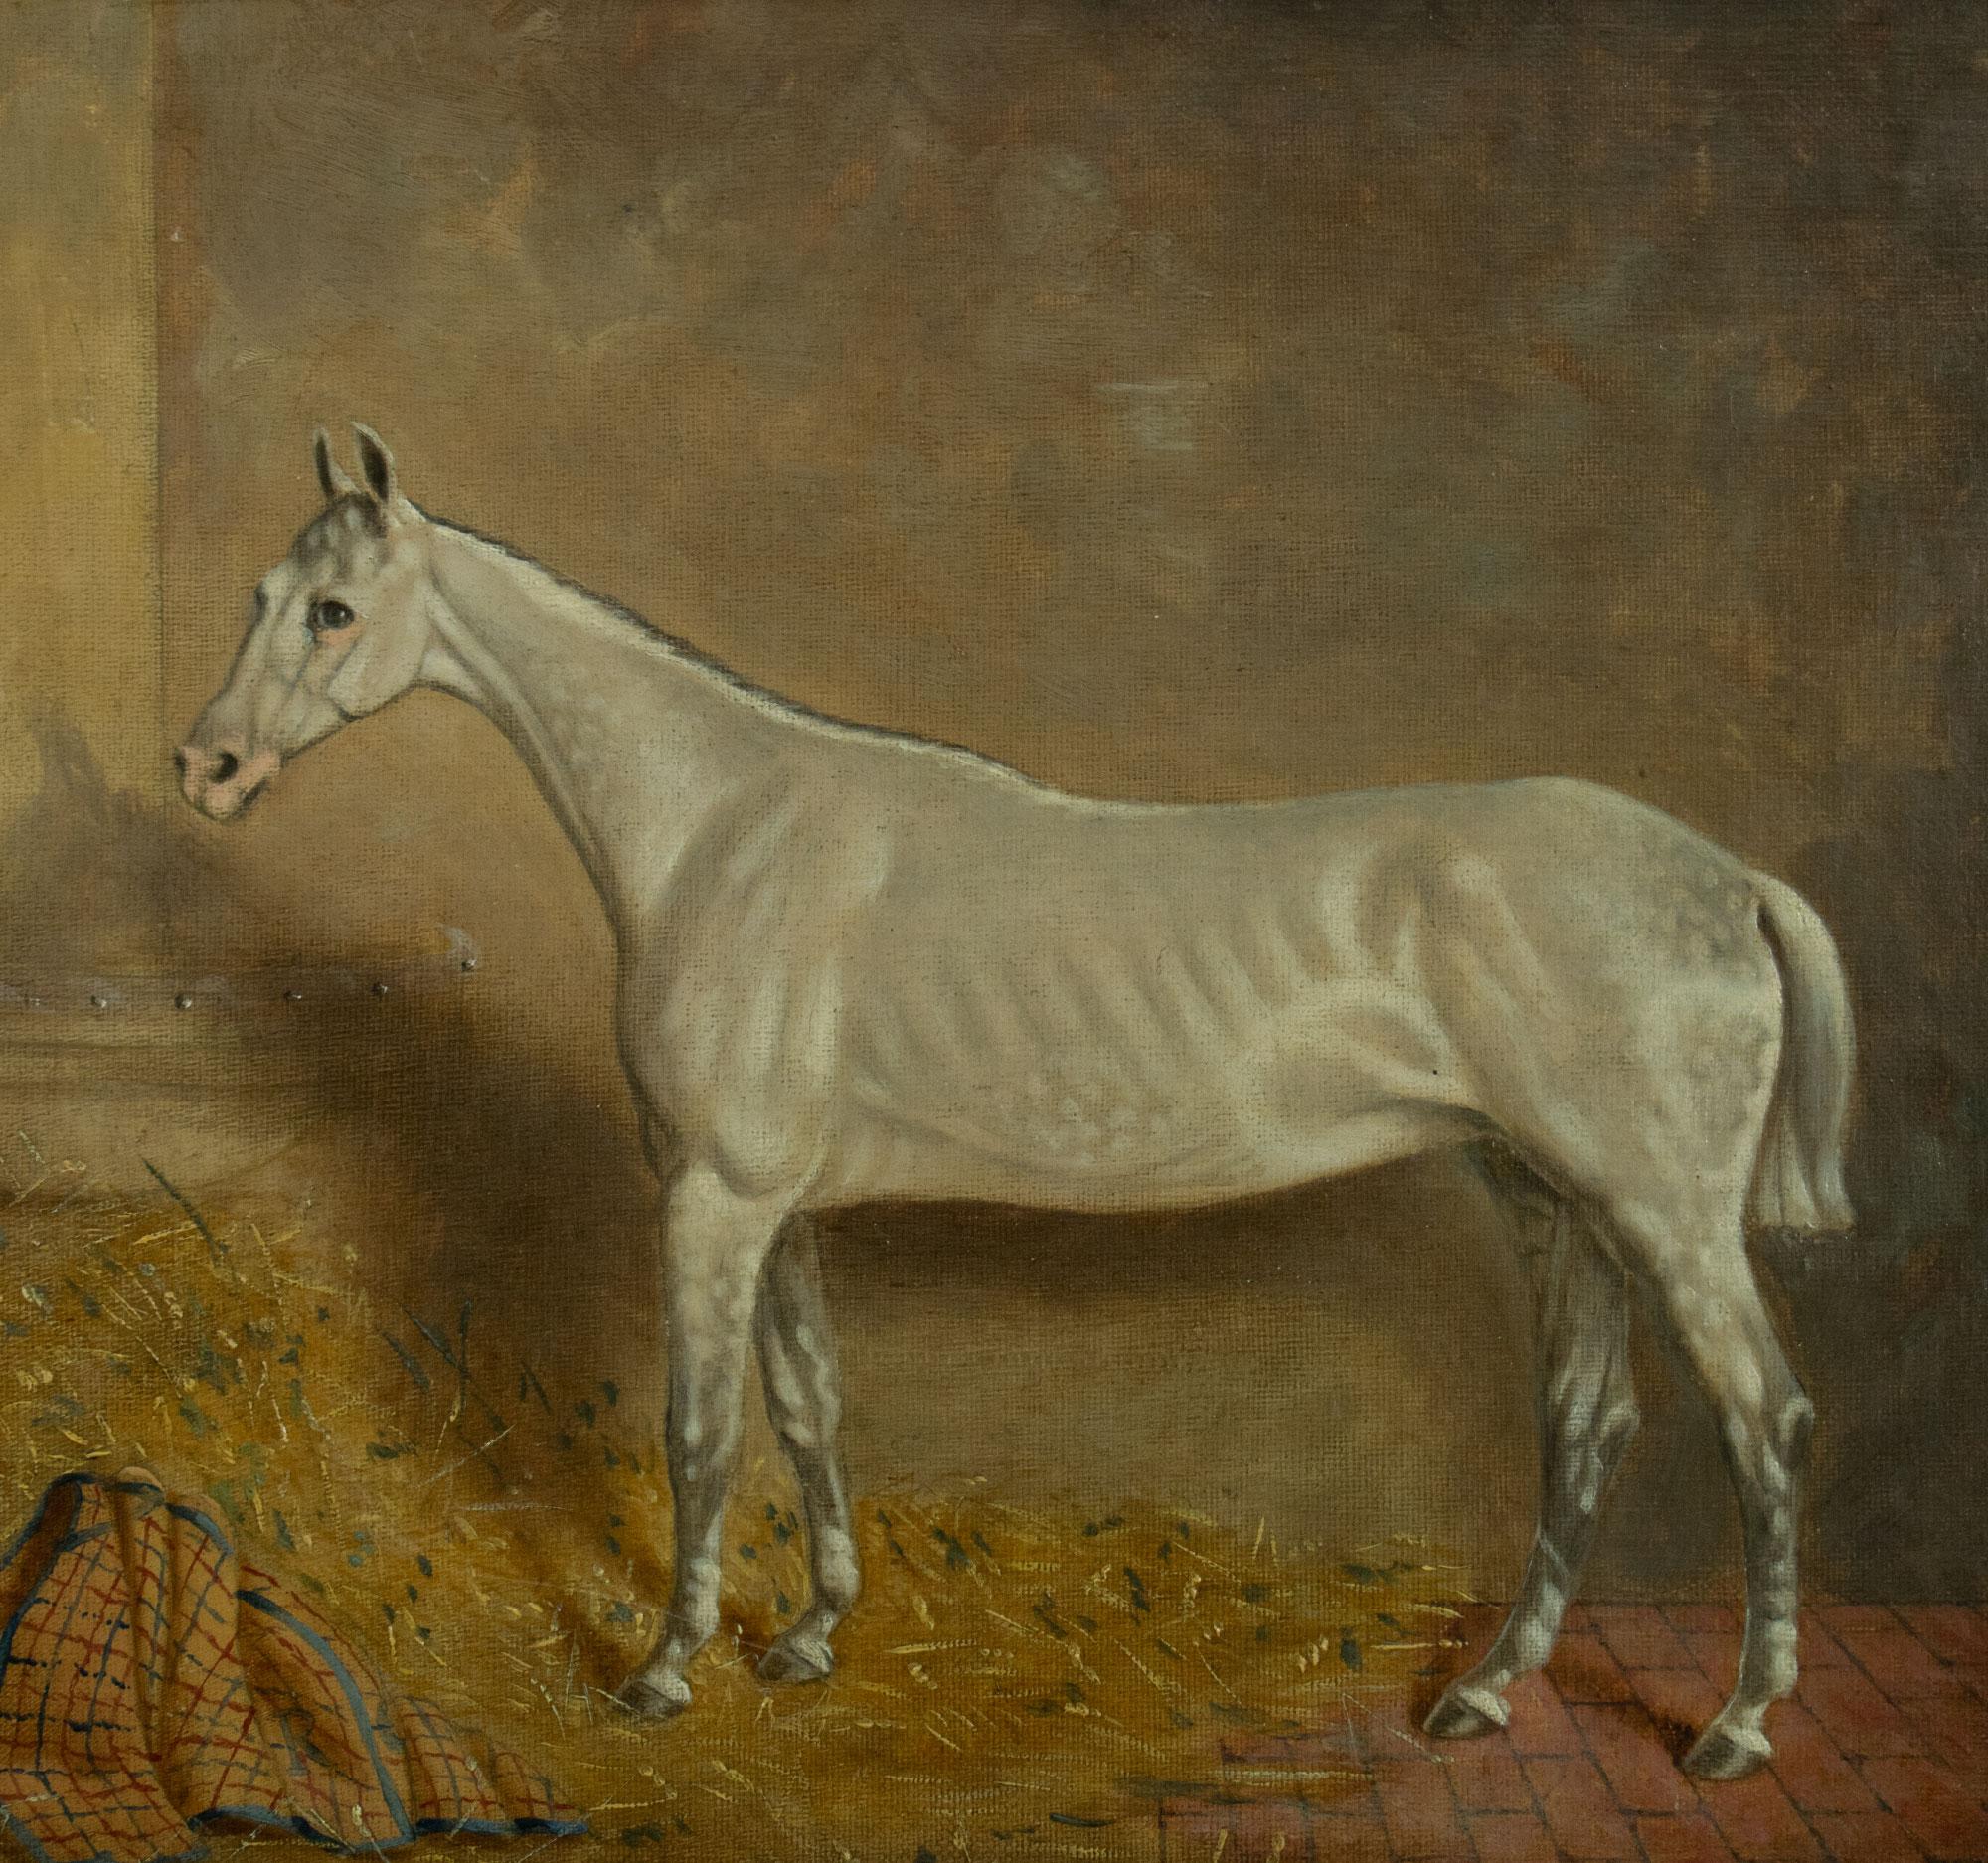 J Truman (British, Active 19th century)

White Horse in its Stable, Oil on canvas, Signed on the reverse and dated 1870. 

J. Truman was a highly respected equestrian artist; this oil painting on canvas, signed and dated on the reverse, perfectly